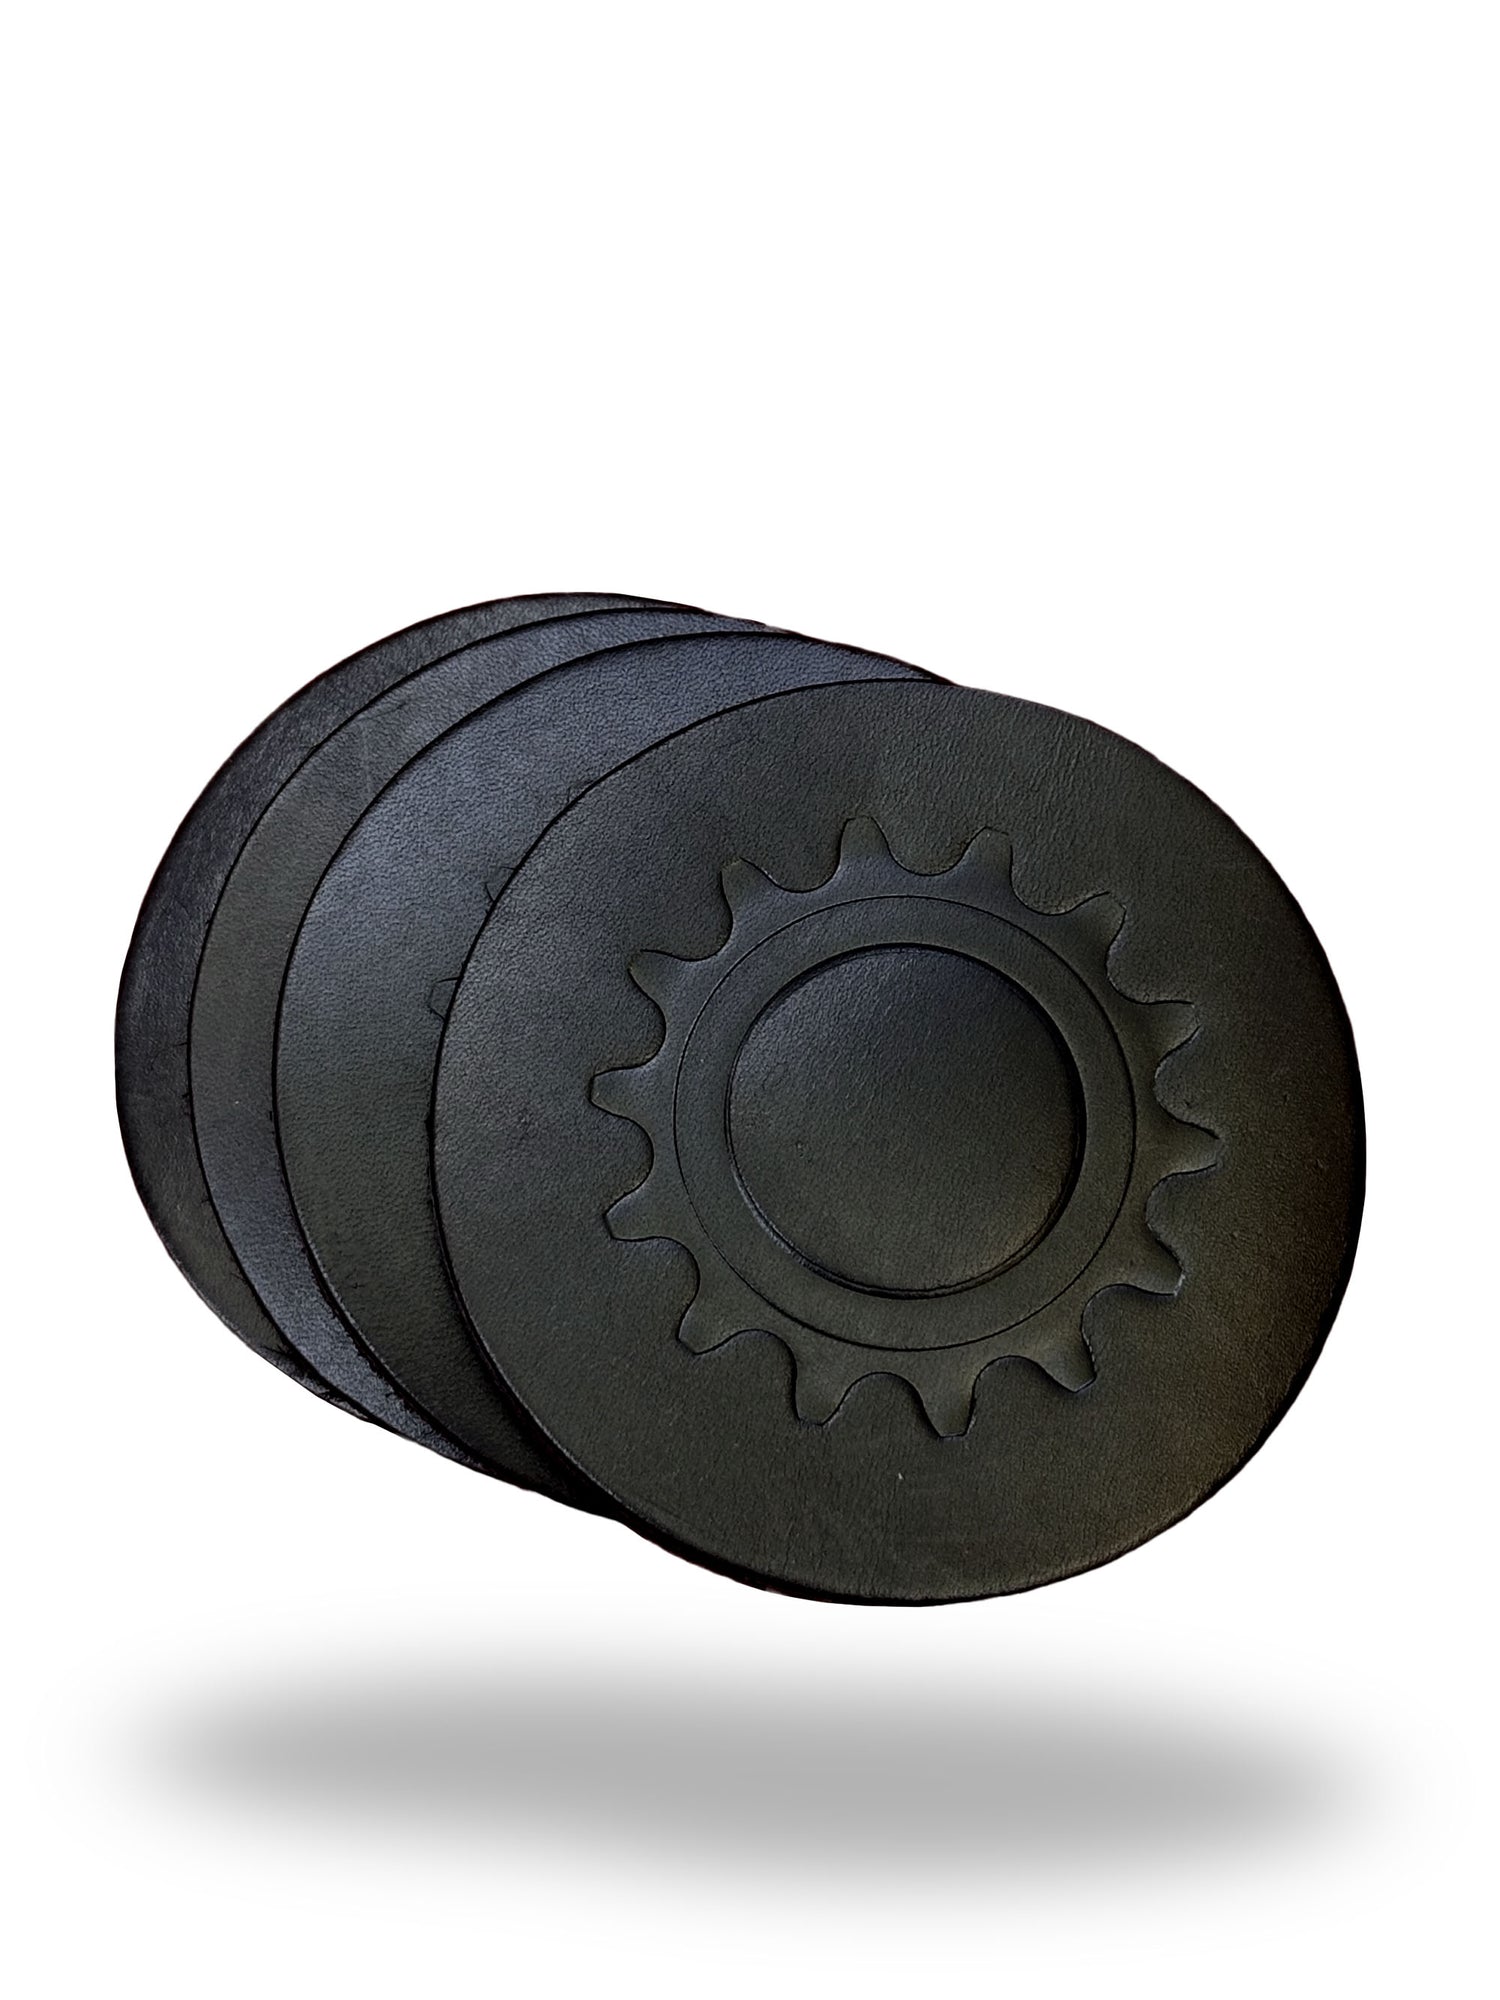 Round Leather Coasters with Bicycle Cog Design - Set of 4